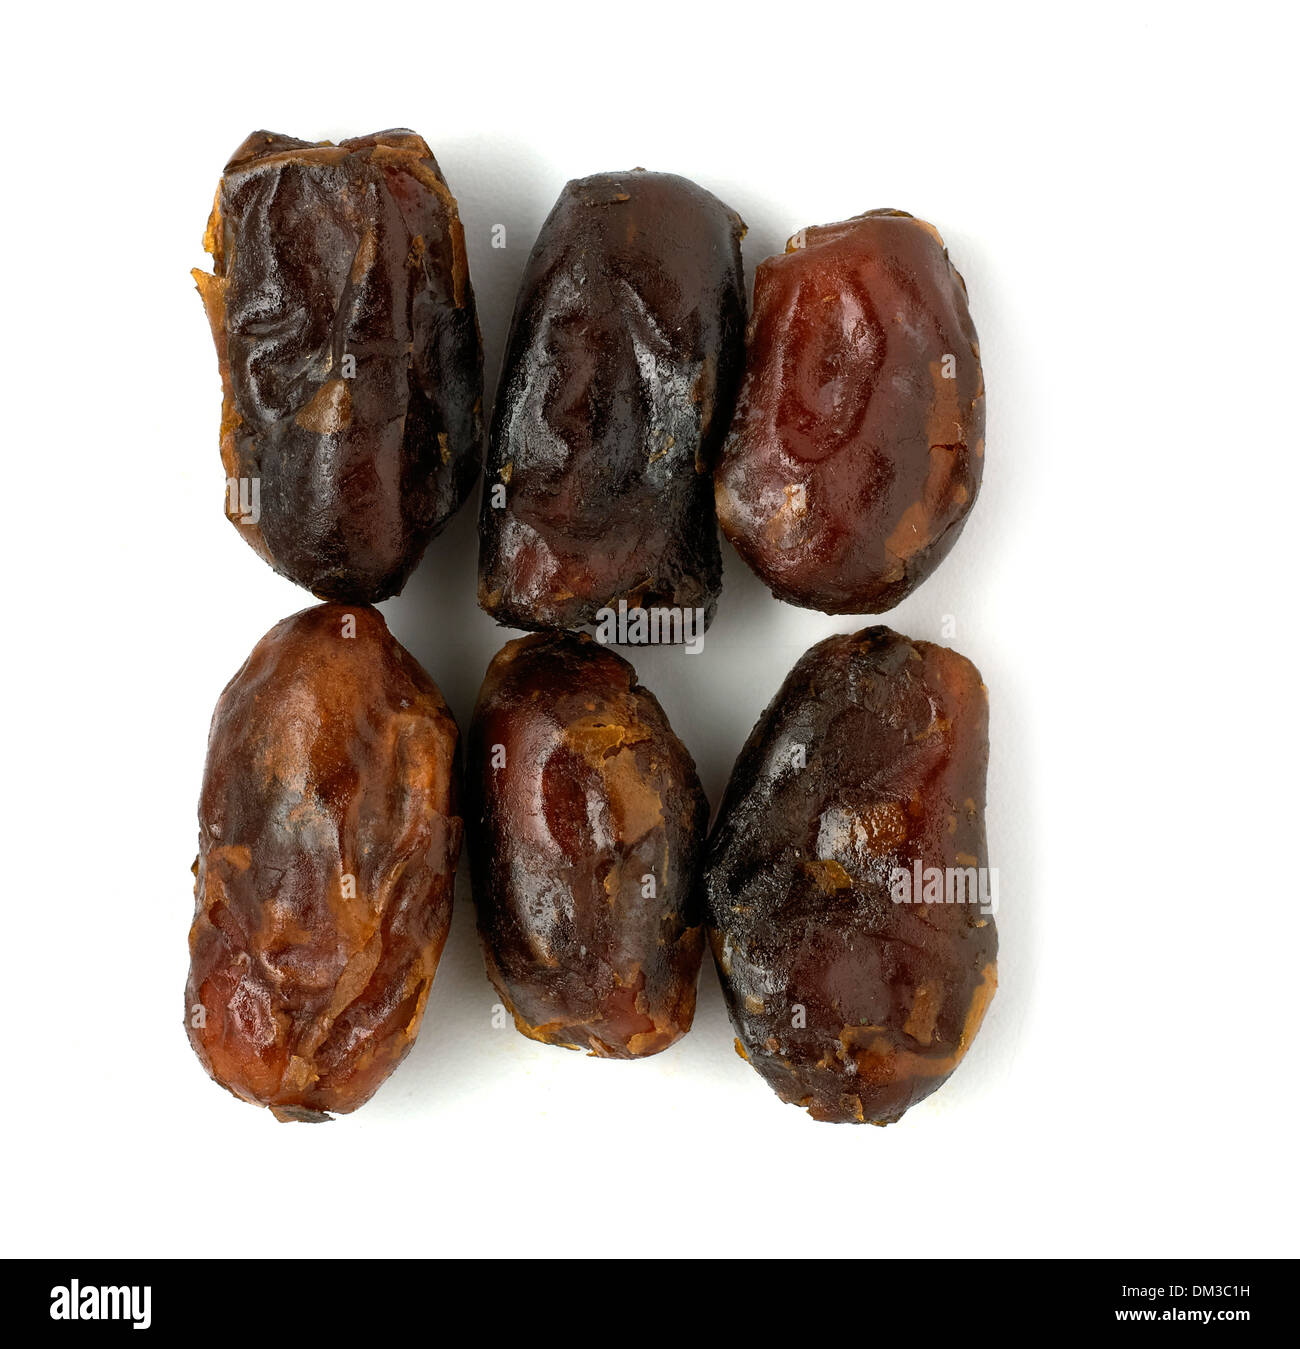 Dates cut out on white background Stock Photo